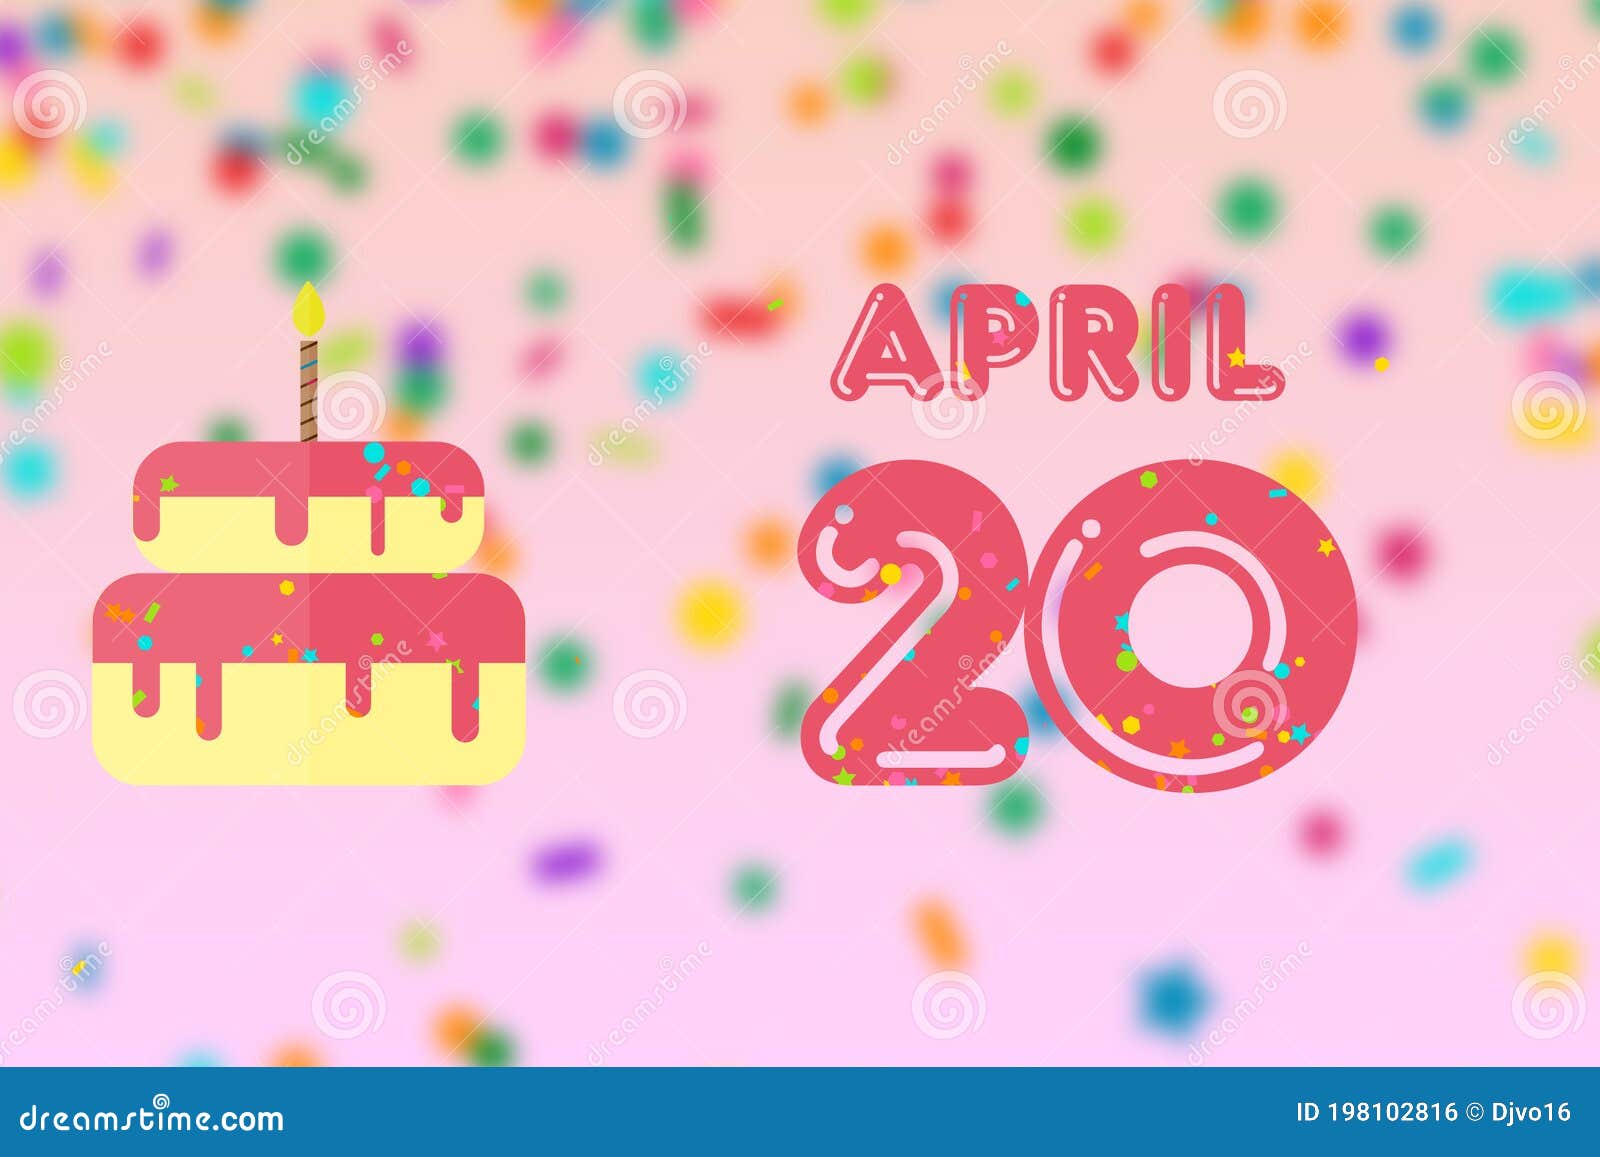 April 20th. Day 20 of Month,Birthday Greeting Card with Date of Birth and Birthday Cake. Spring Month, Day of the Year Concept Stock Illustration - Illustration of birthday, remind: 198102816